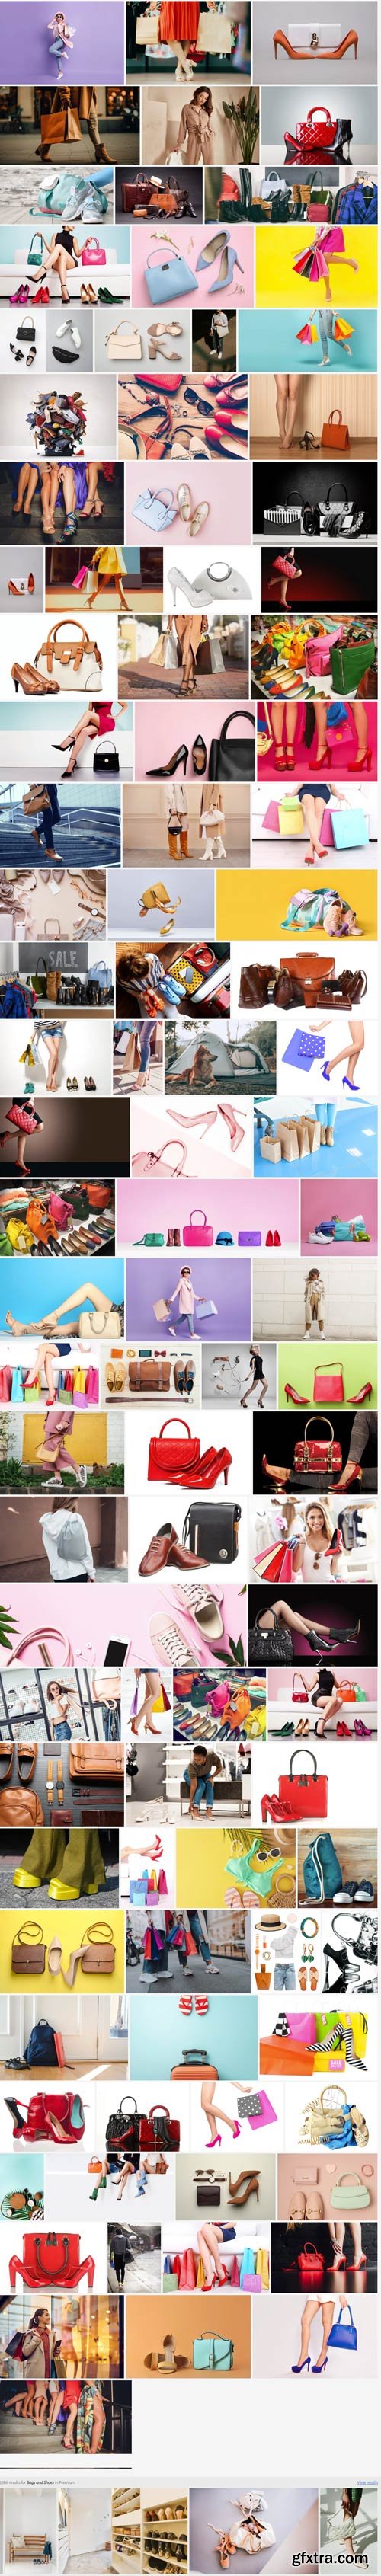 Bags-and-Shoes-JPG